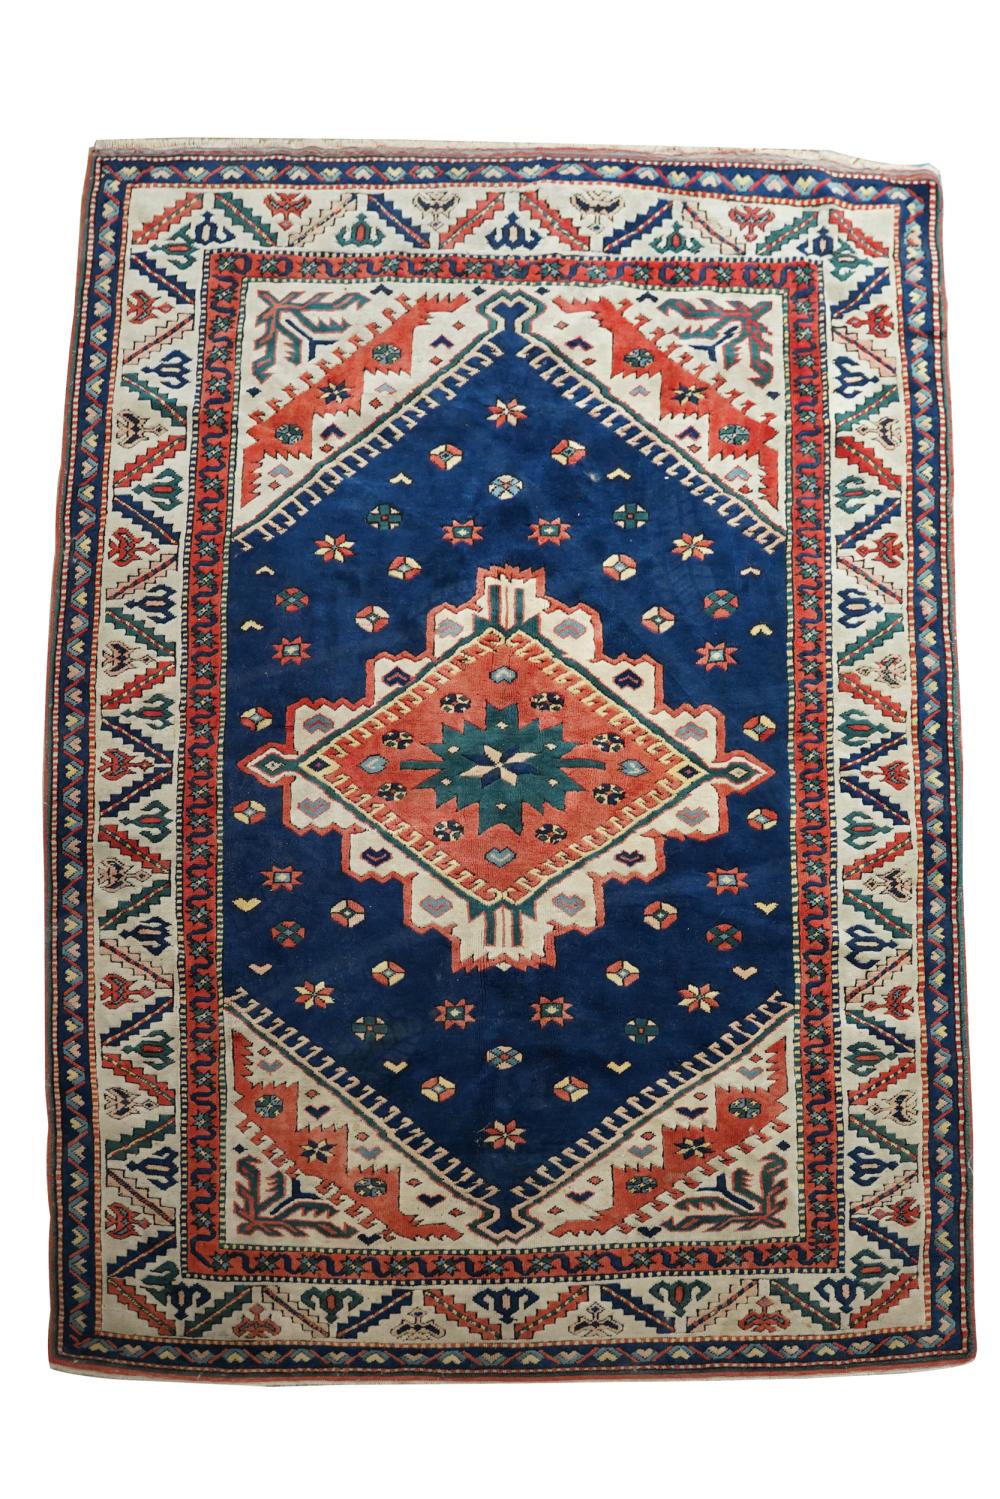 PERSIAN CARPETwith central medallion 33390d